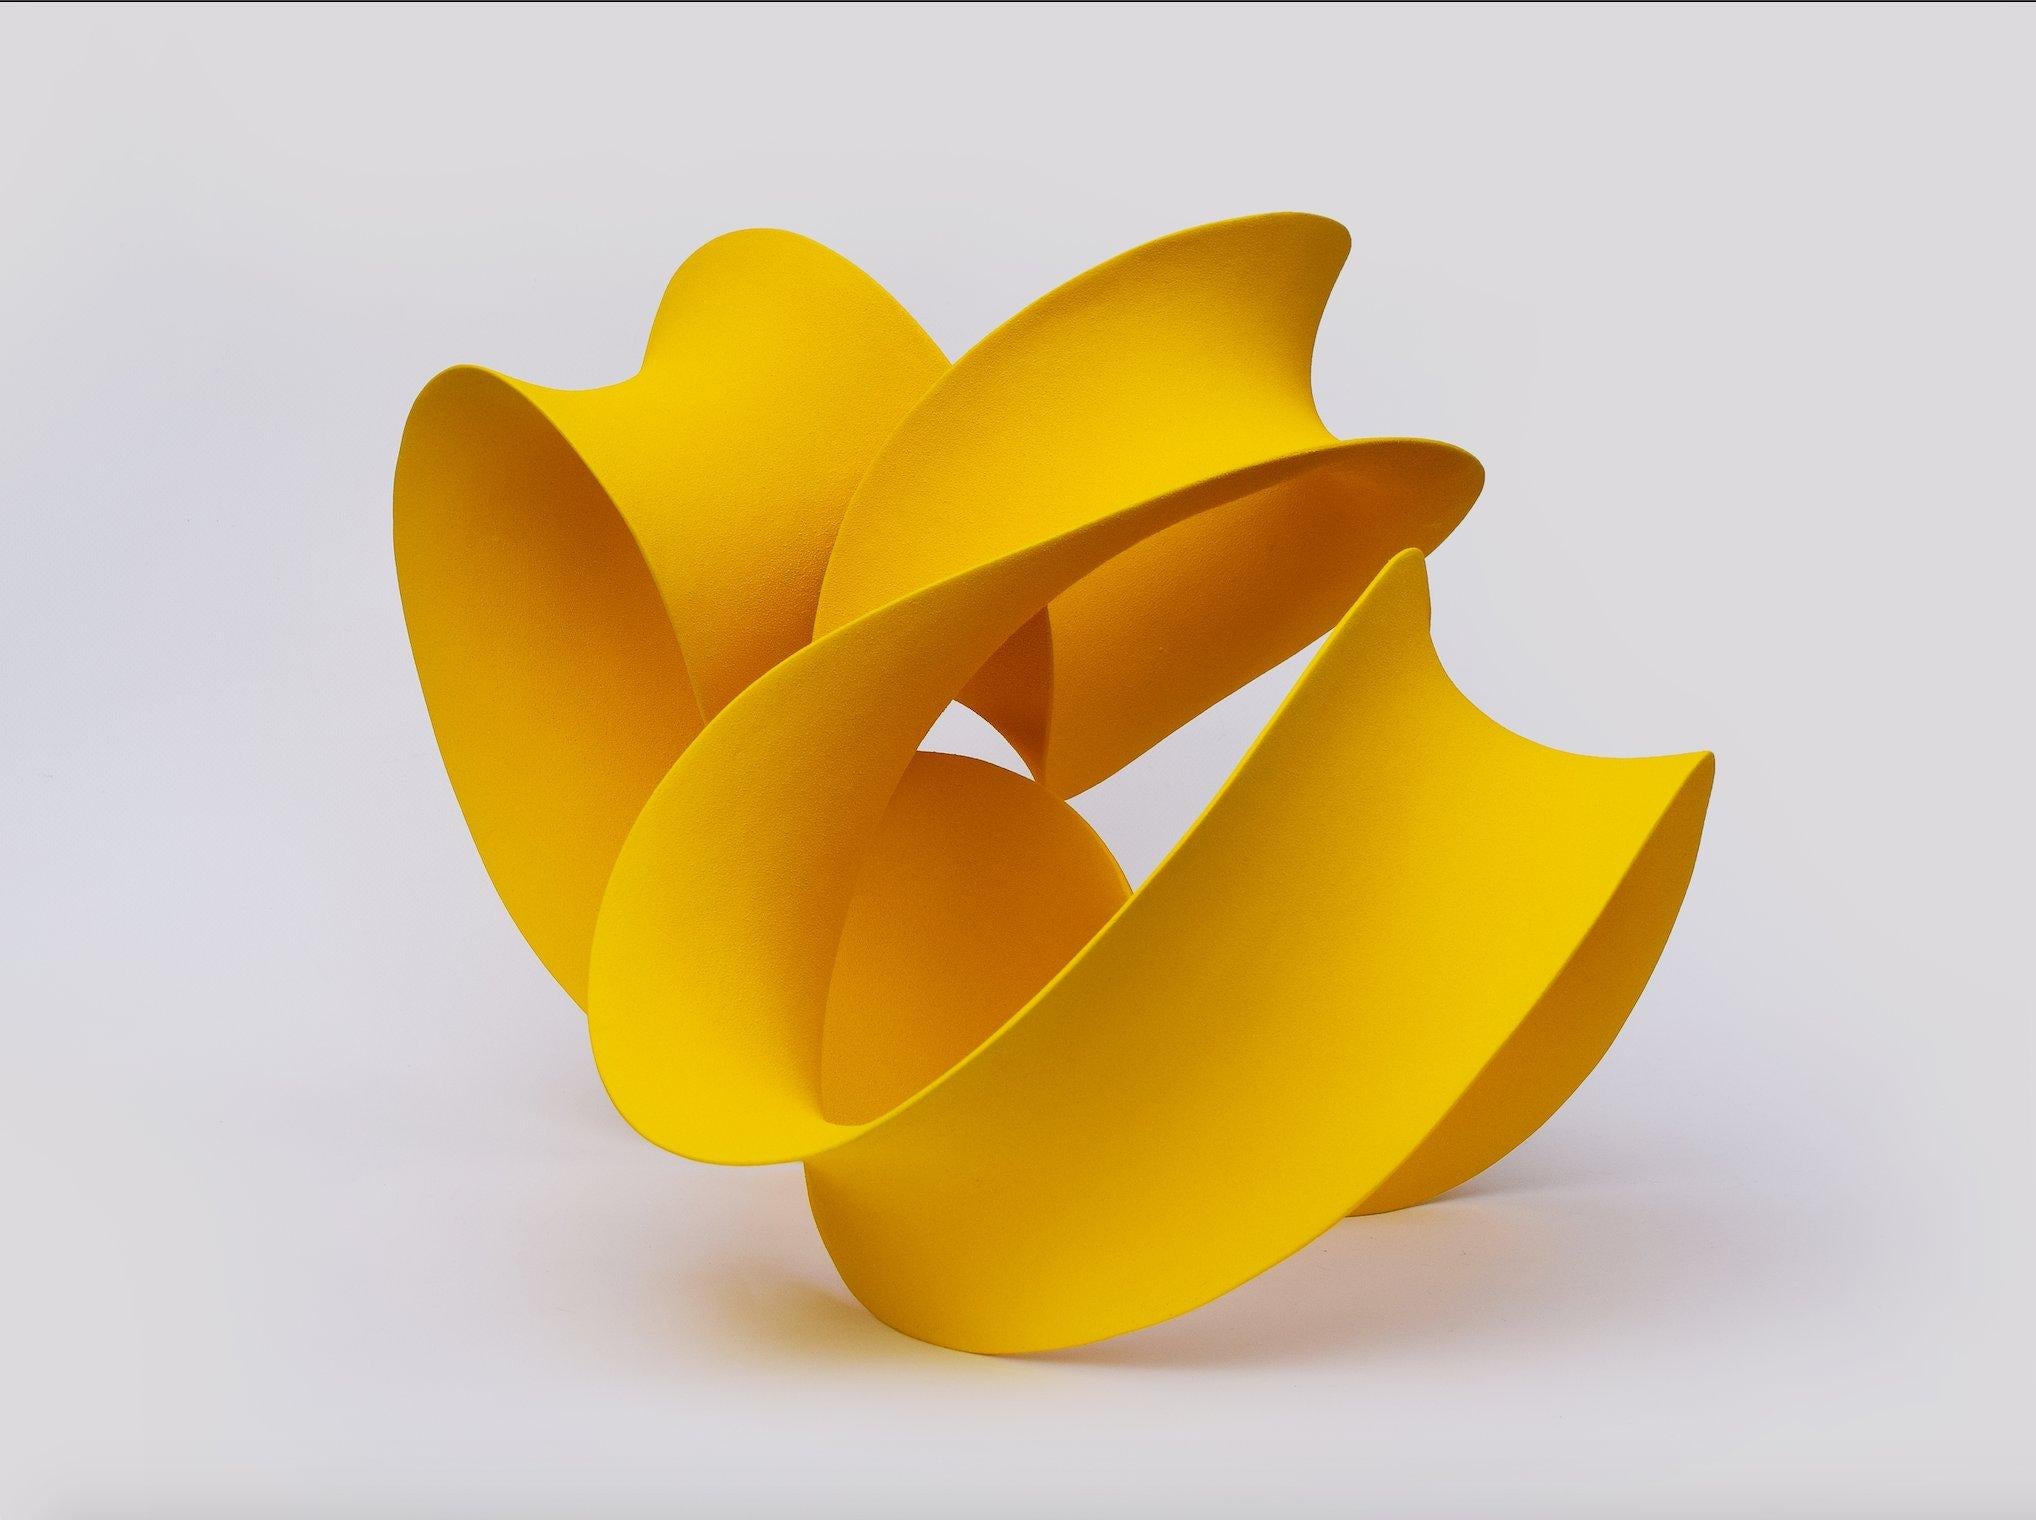 Yellow Curved Form, 2023 (Ceramic, C. 14.5 in. h x 22.4 in. w x 17.7 in. d, Object No.: 4190)

Merete works with abstract sculptural form and is interested in the way one defines and comprehends space through physical form. Her ceramic creations